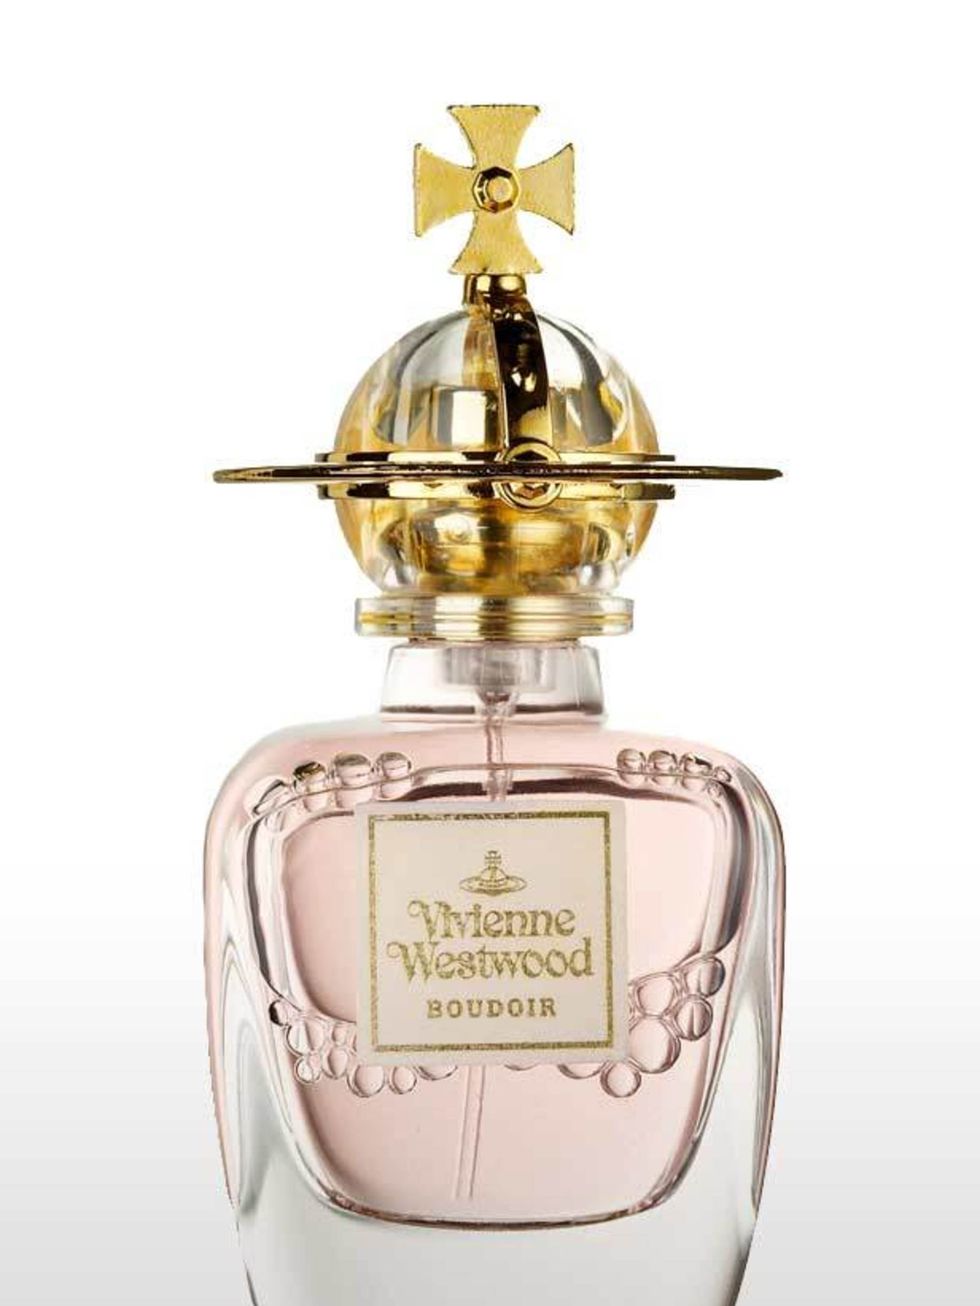 <p>Nominated by Georgia Collins, acting beauty editor, ELLE</p><p>Vivienne Westwood Boudoir EDP, £32 for 30ml</p>